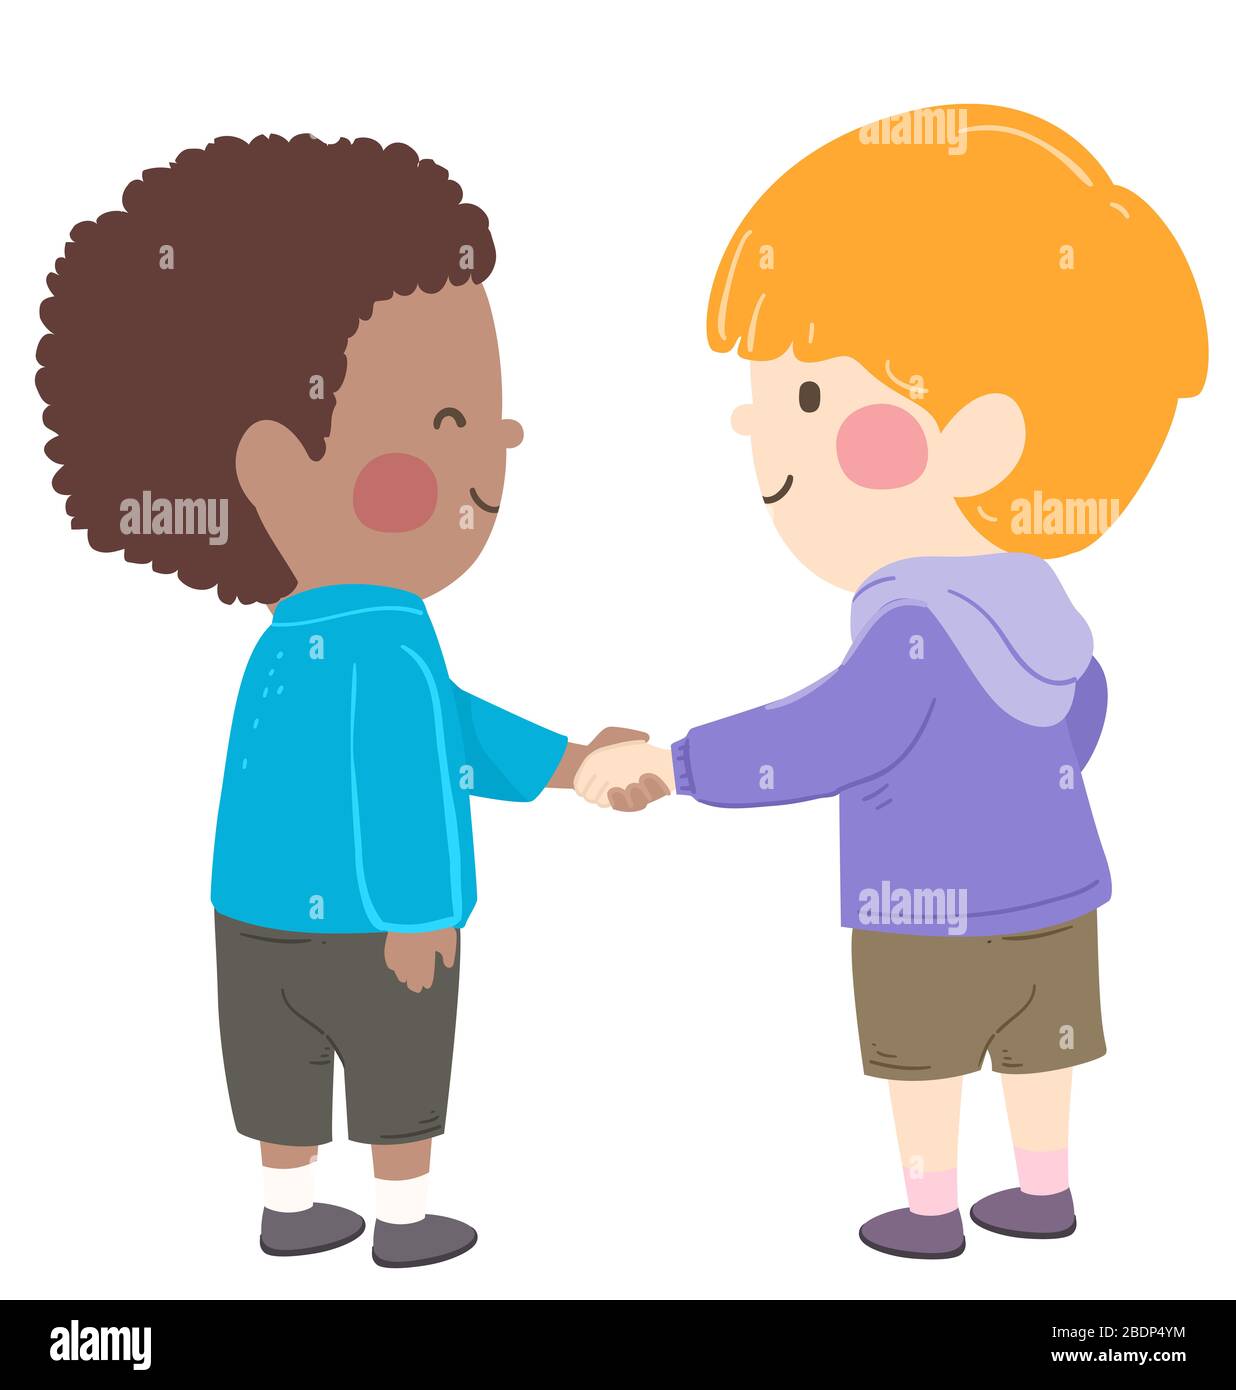 Children Shaking Hands Cut Out Stock Images And Pictures Alamy